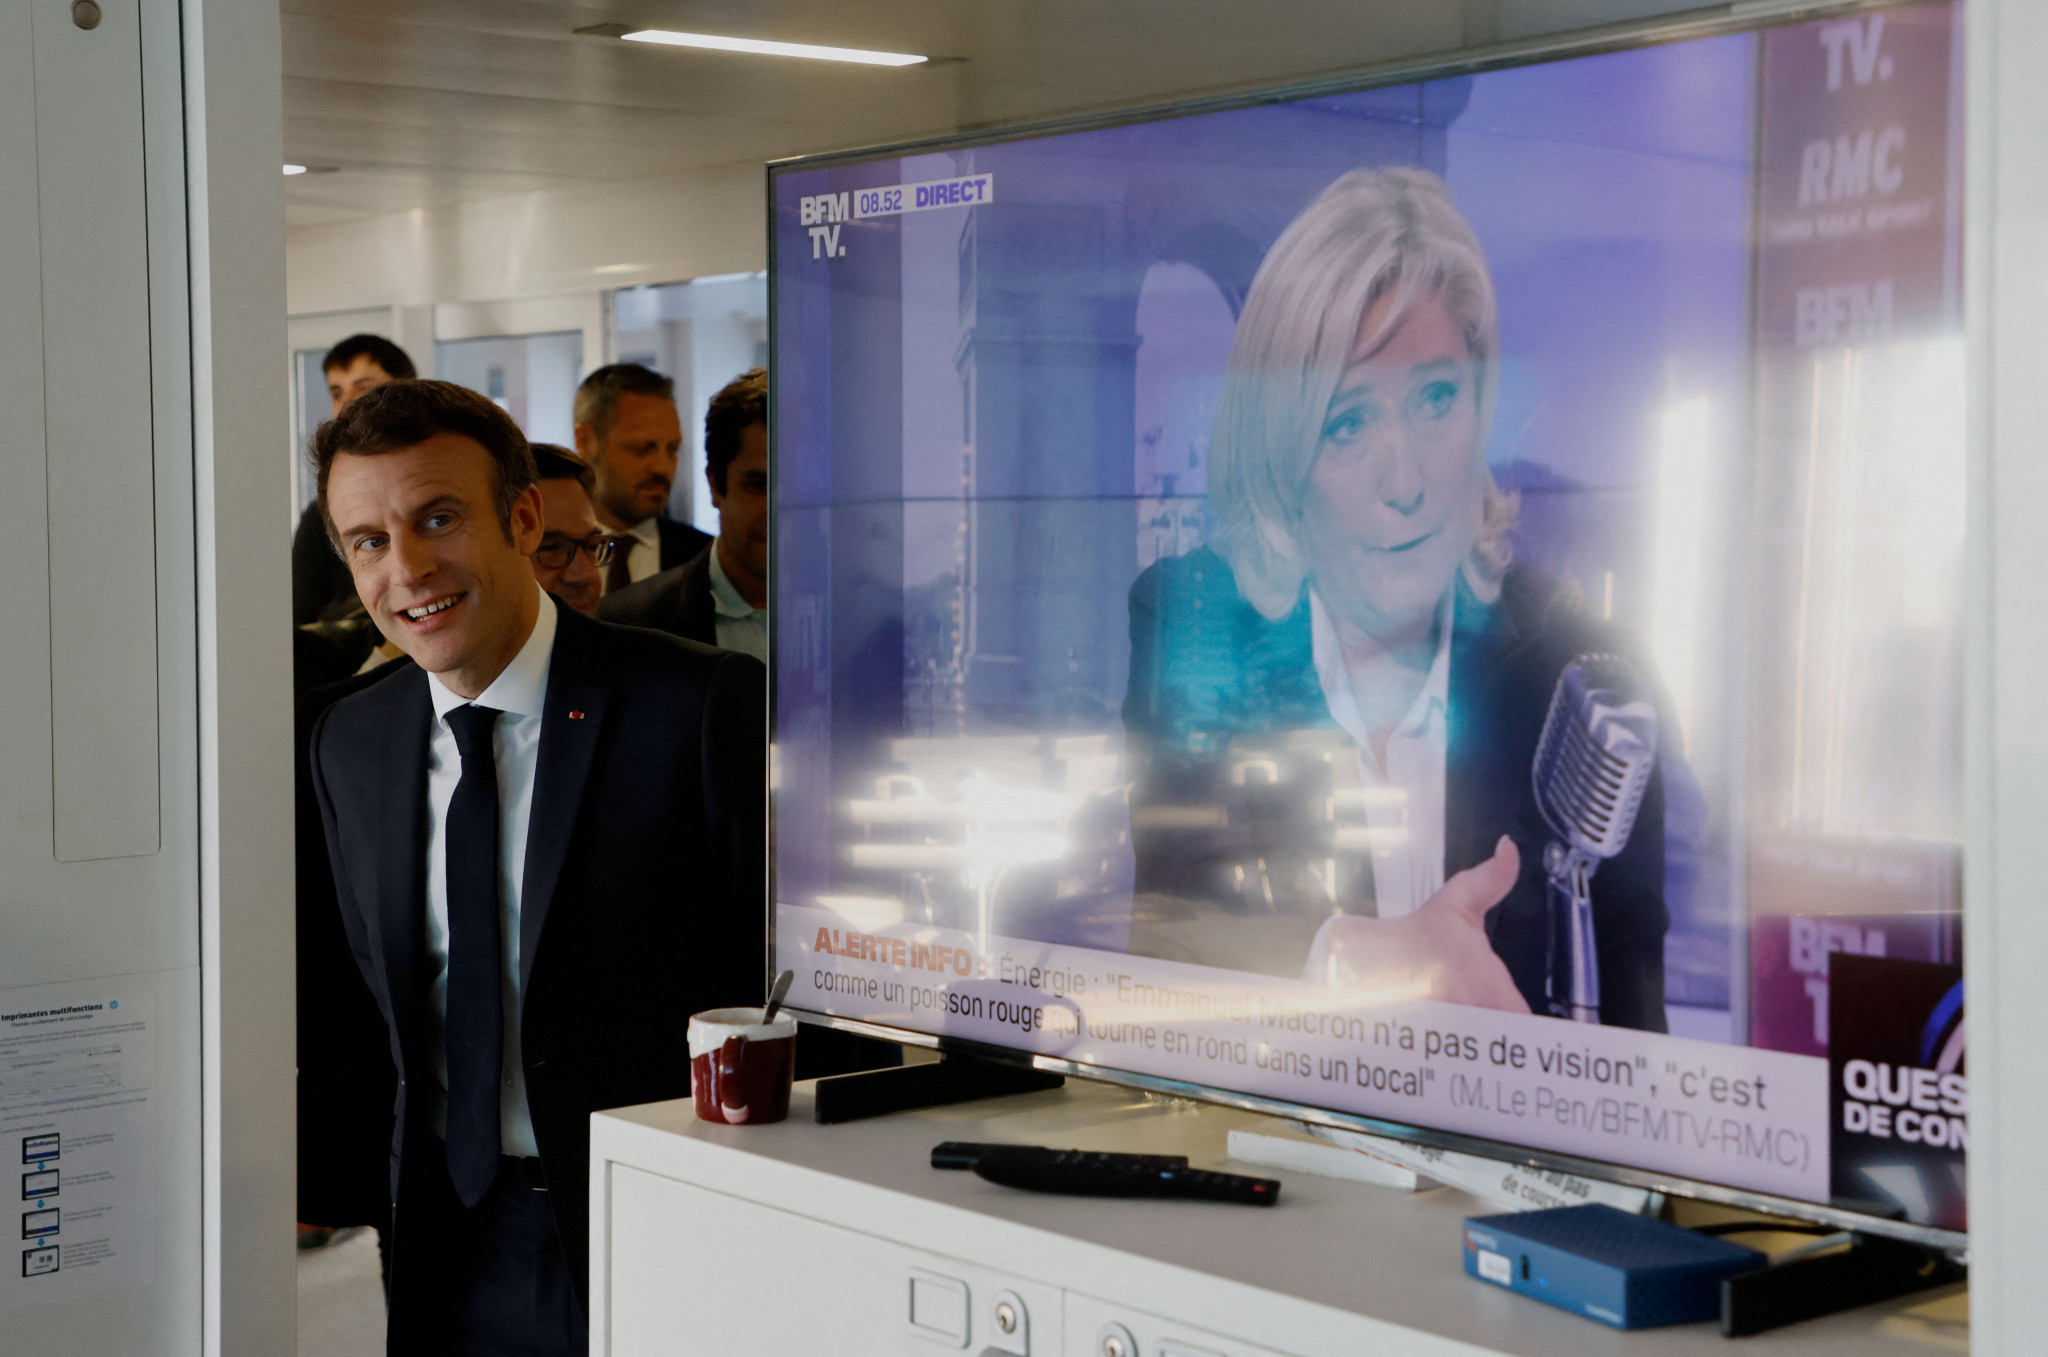 Emmanuel Macron, left, and Marine Le Pen face a run-off for the French Presidency ©Getty Images